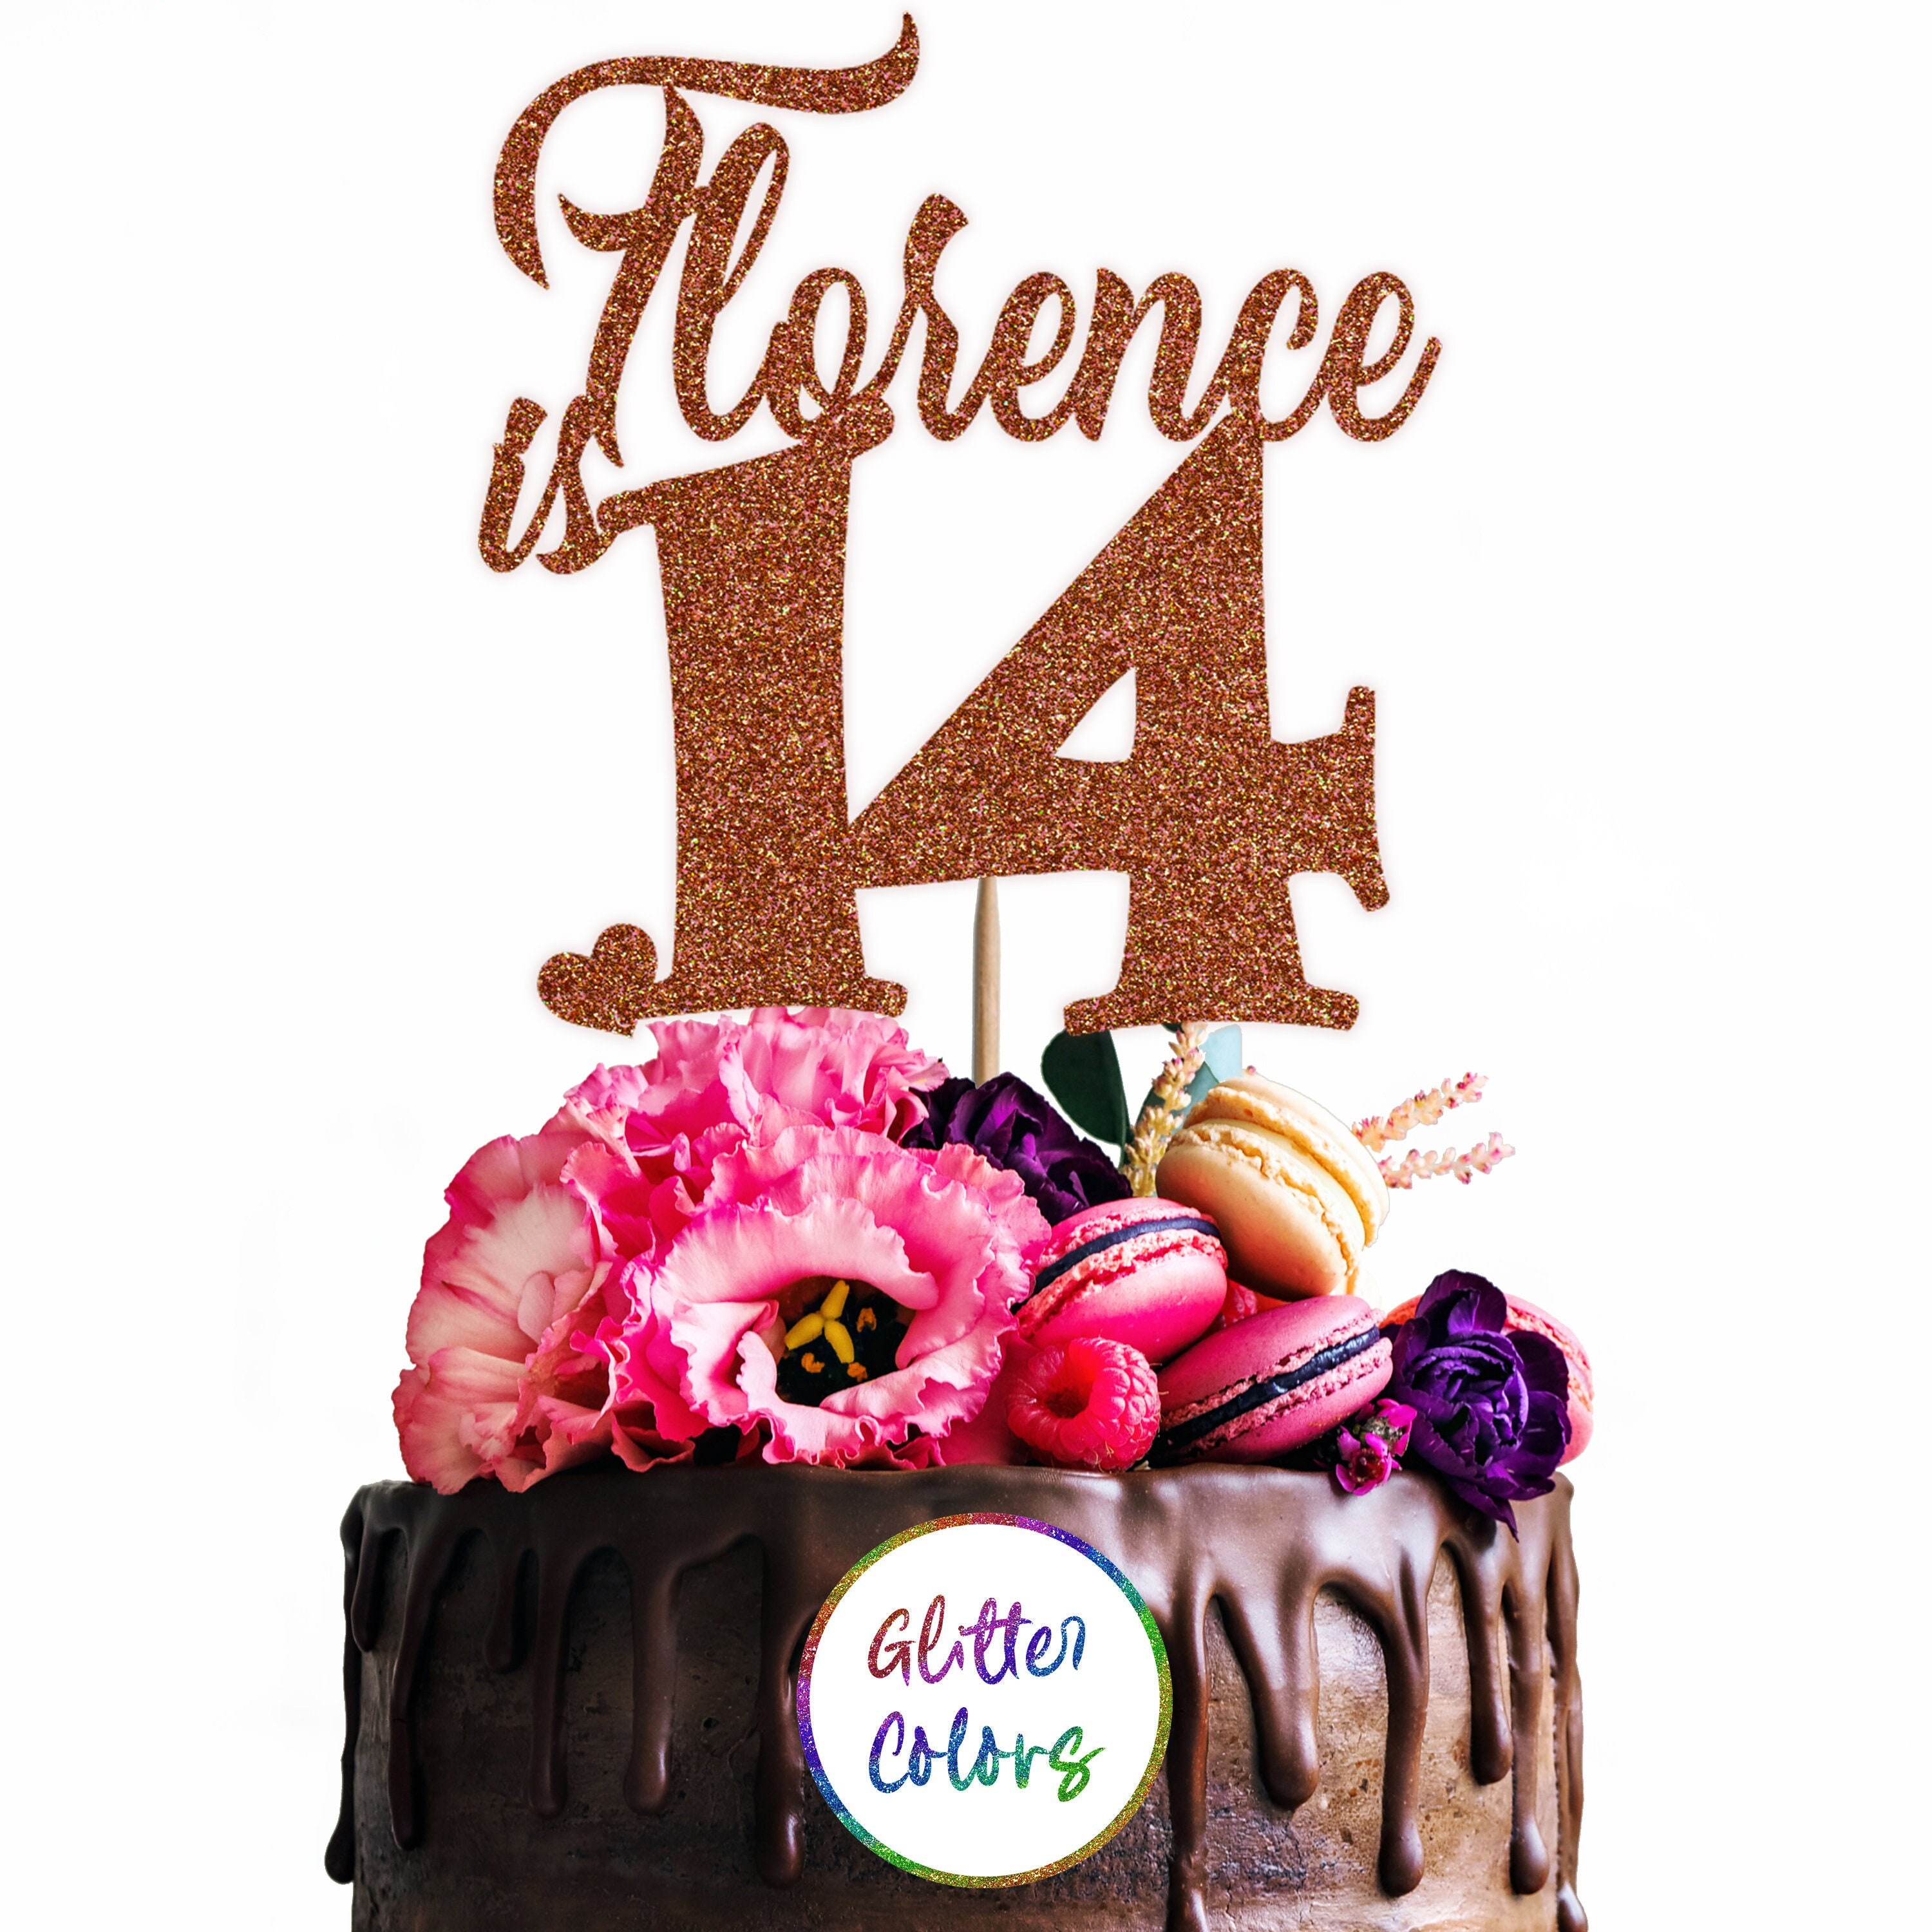 SEND CAKES TO FLORENCE - CAKE DELIVERY IN FLORENCE